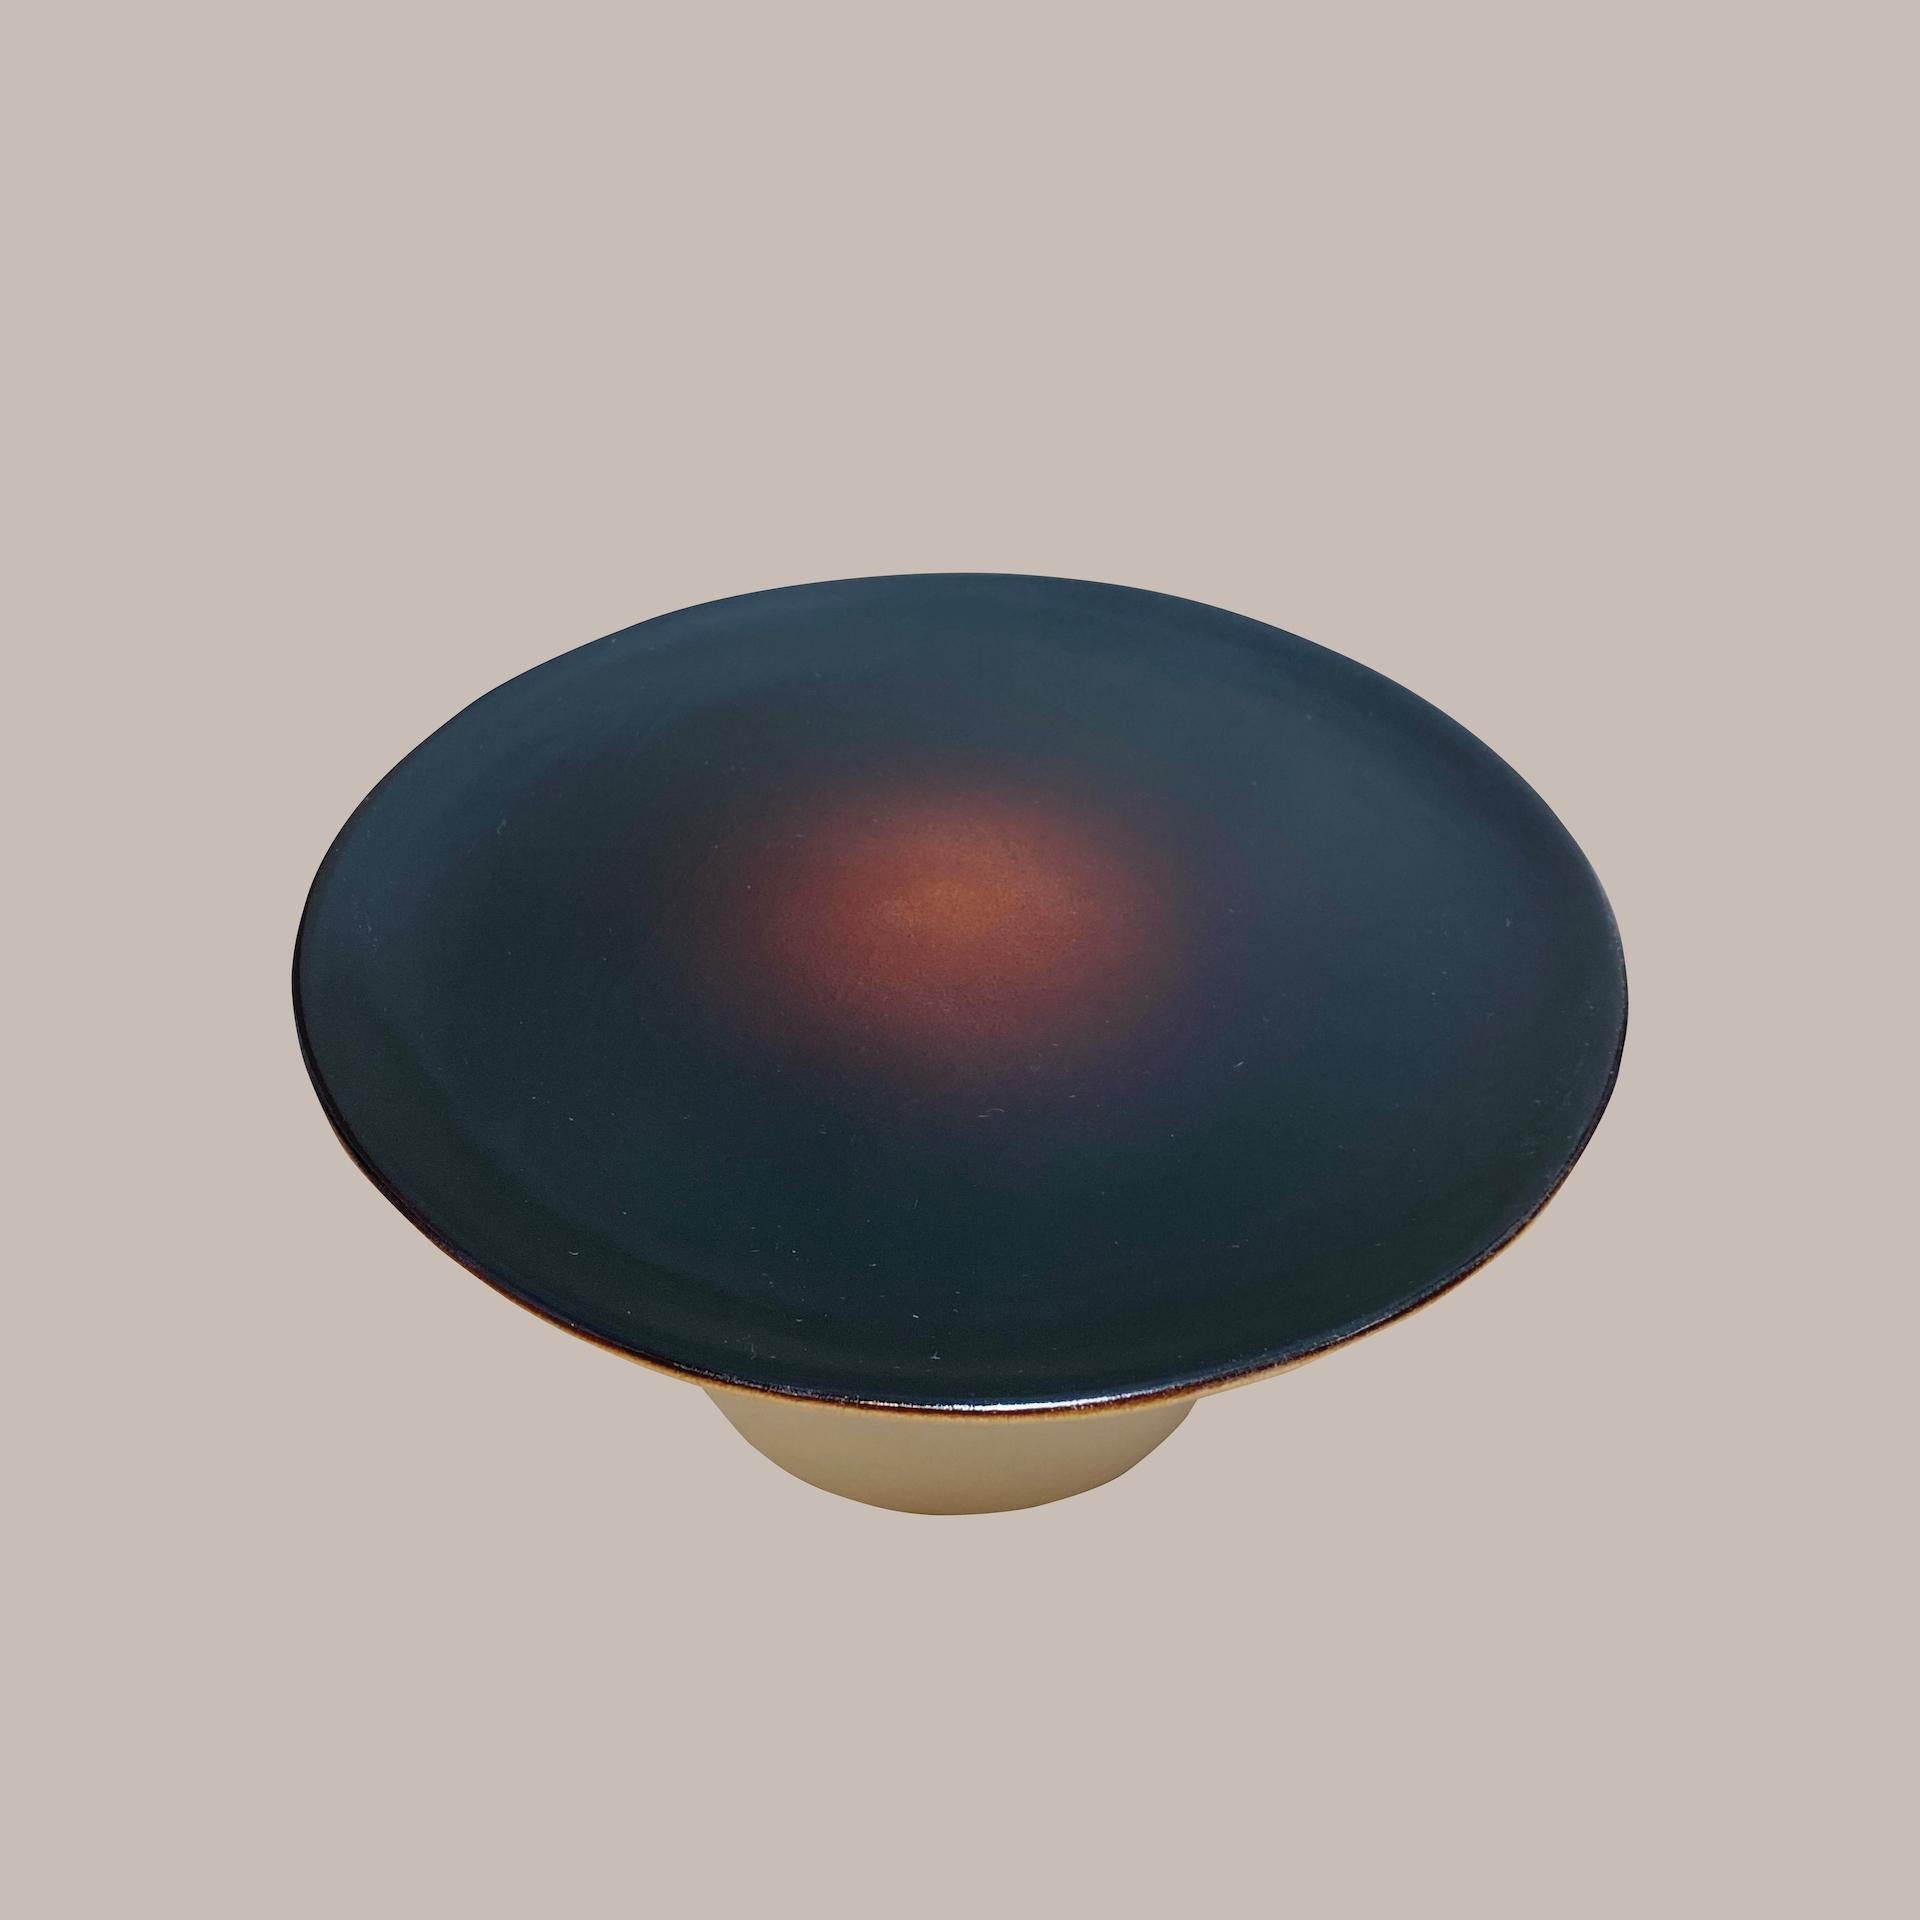 Ott another paradigmatic handmade ceramic high-plate by Studio Yoon Seok-hyeon
2019
Dimensions: W 18 x H 10 cm
Materials: Ott(Natural resin from Ott tree), porcelain
650g

It is available to customize various colors in Ott's natural color